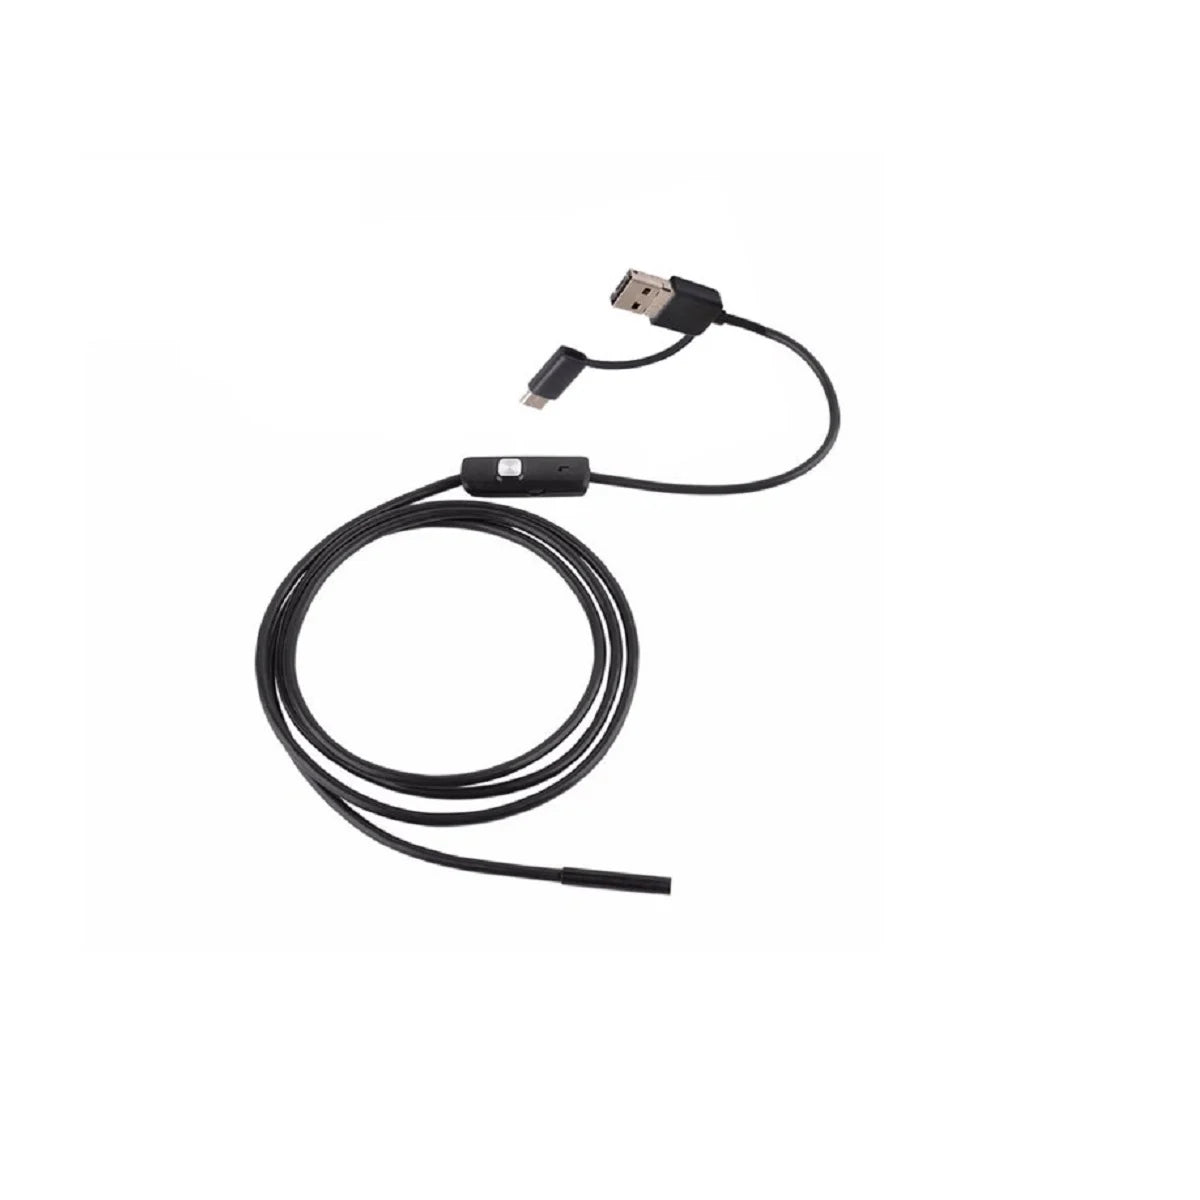 7mm 3 in 1 HD Android Mobile Phone Endoscope Camera with 1M Length Waterproof IP67 6 LEDs USB Inspection